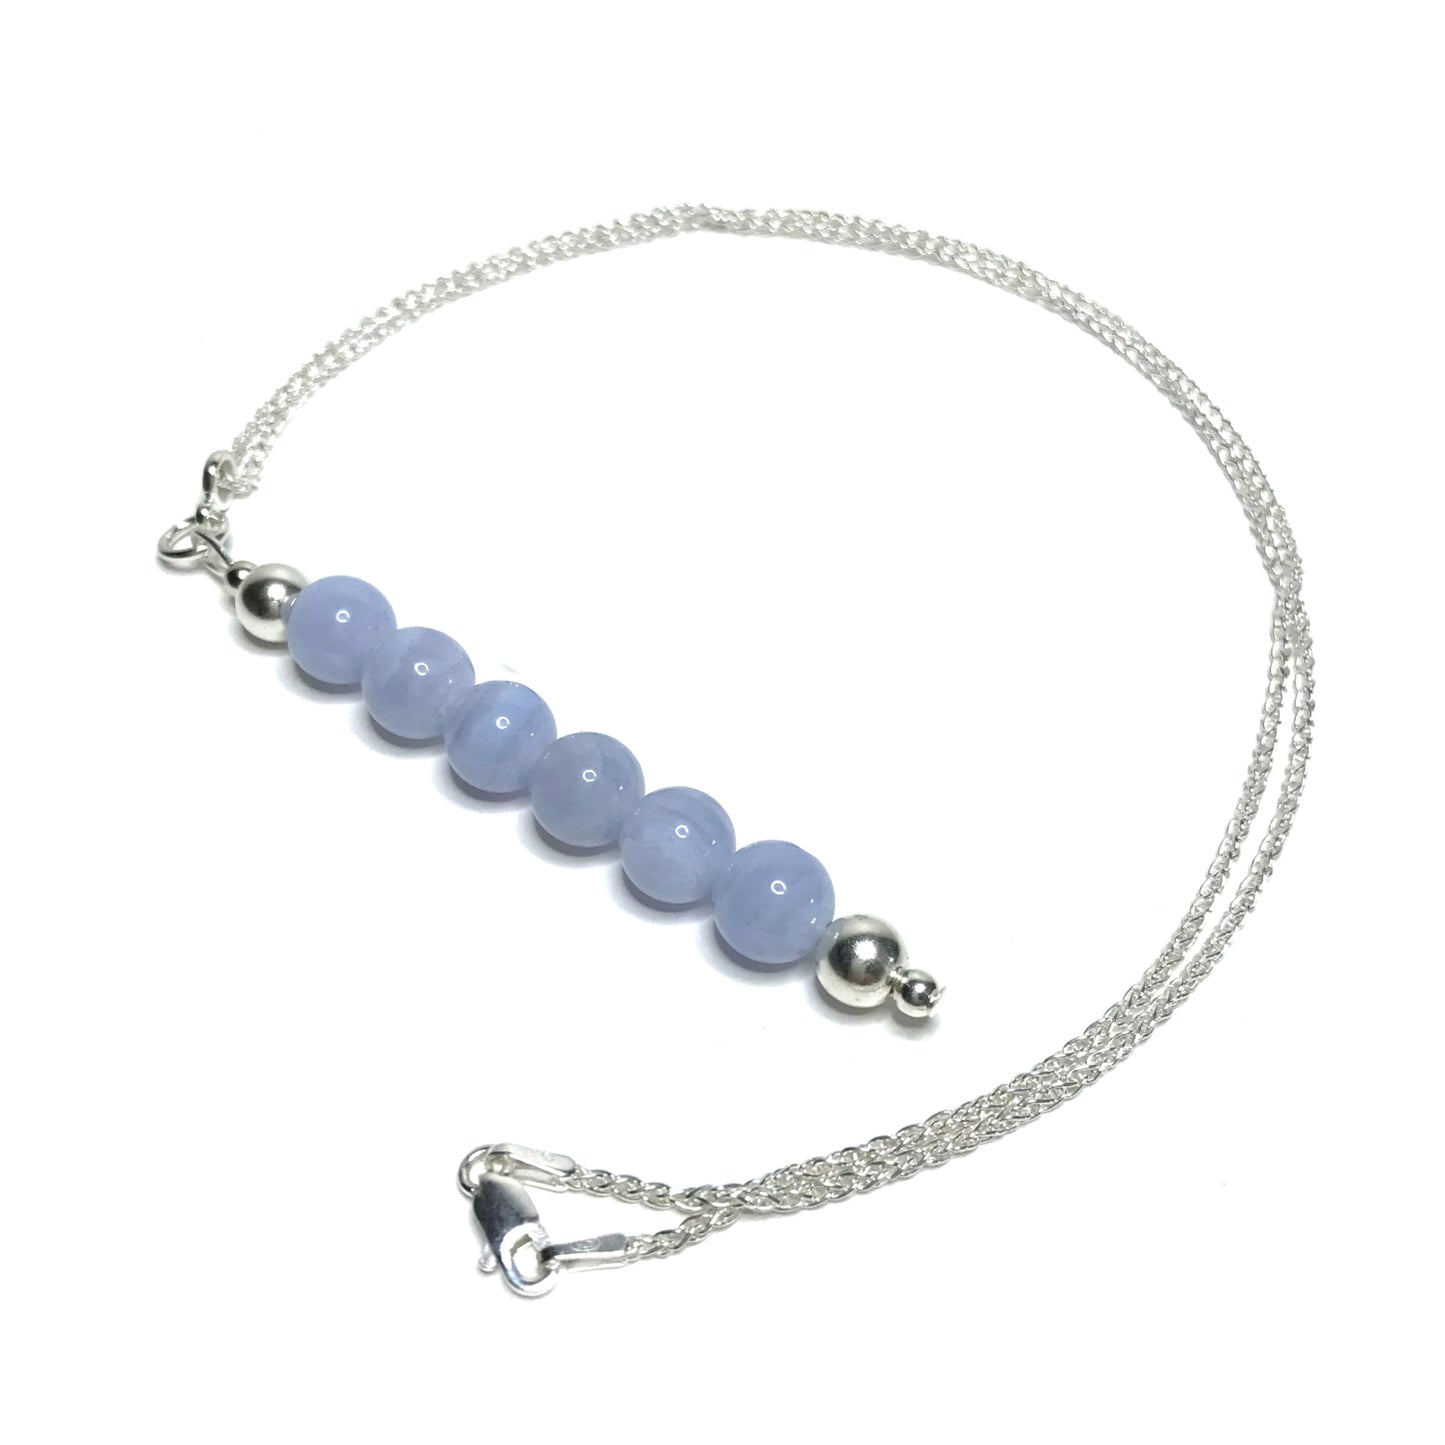 Blue lace agate crystal bead pendant on silver chain